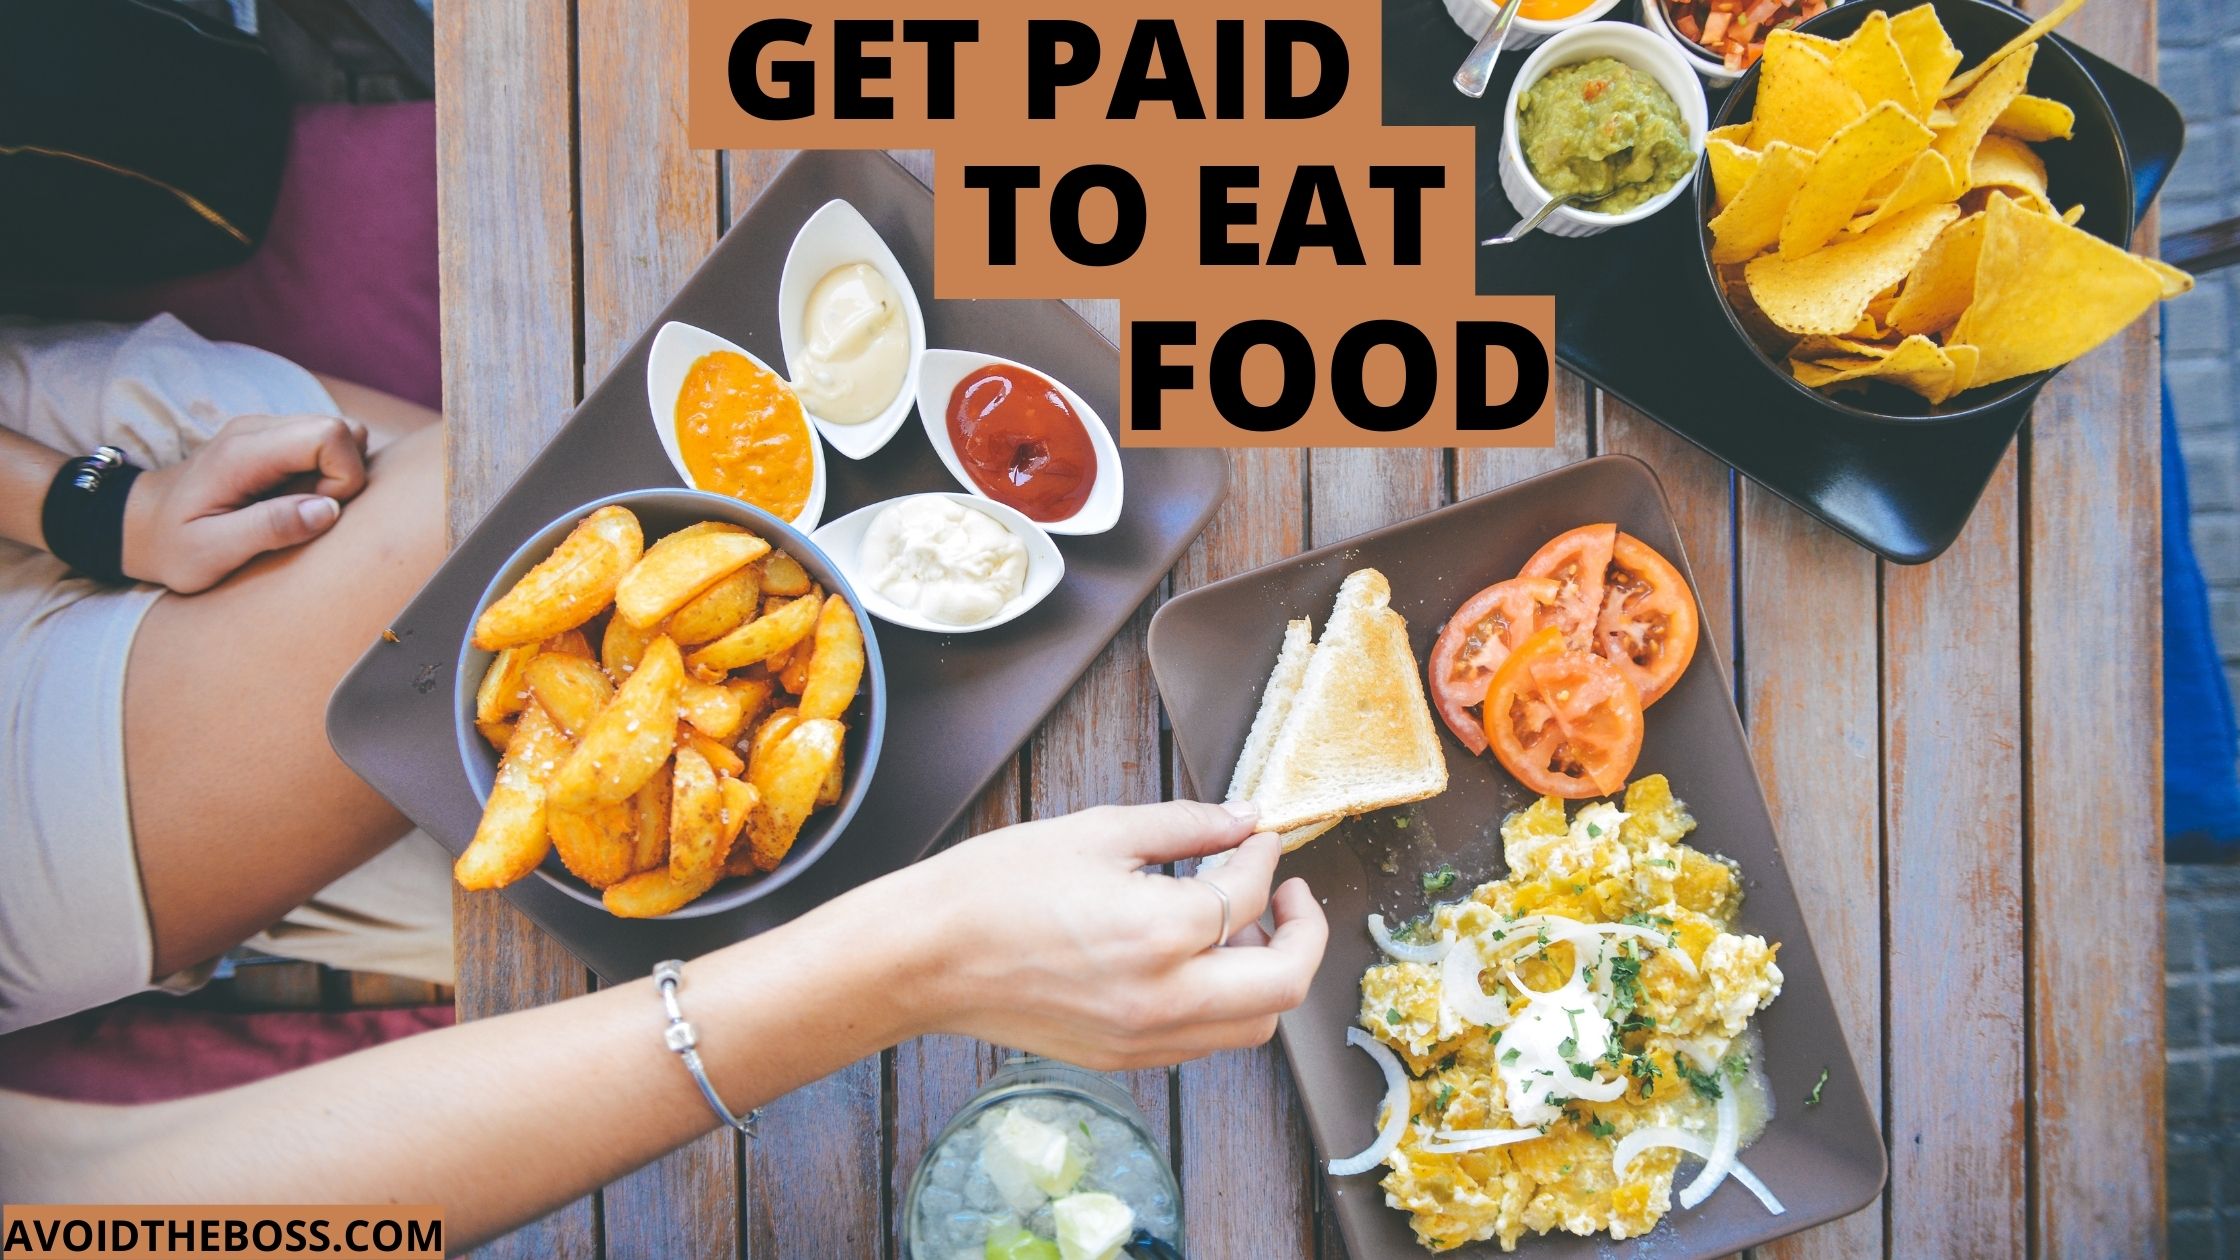 Tasty Ways to get paid to eat food